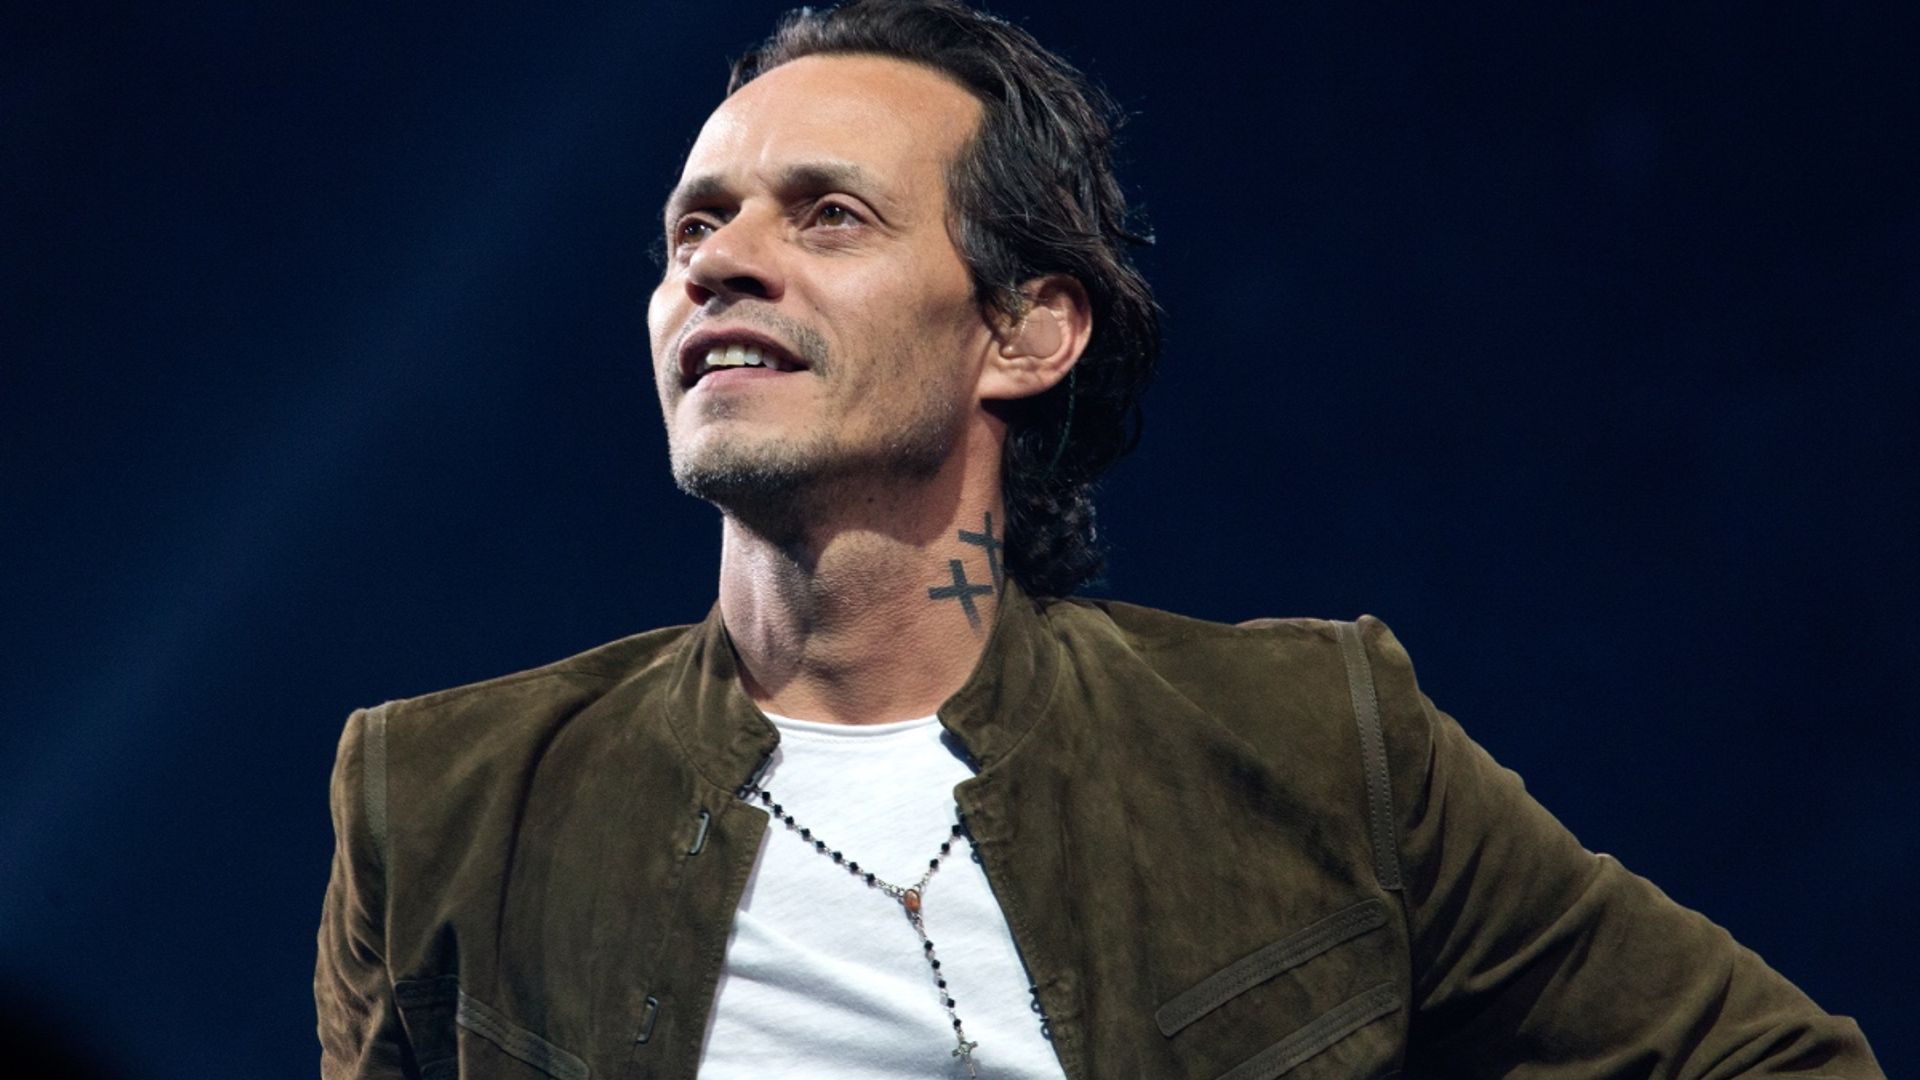 Marc Anthony gets overwhelmed in new video from wedding to Nadia Ferreira